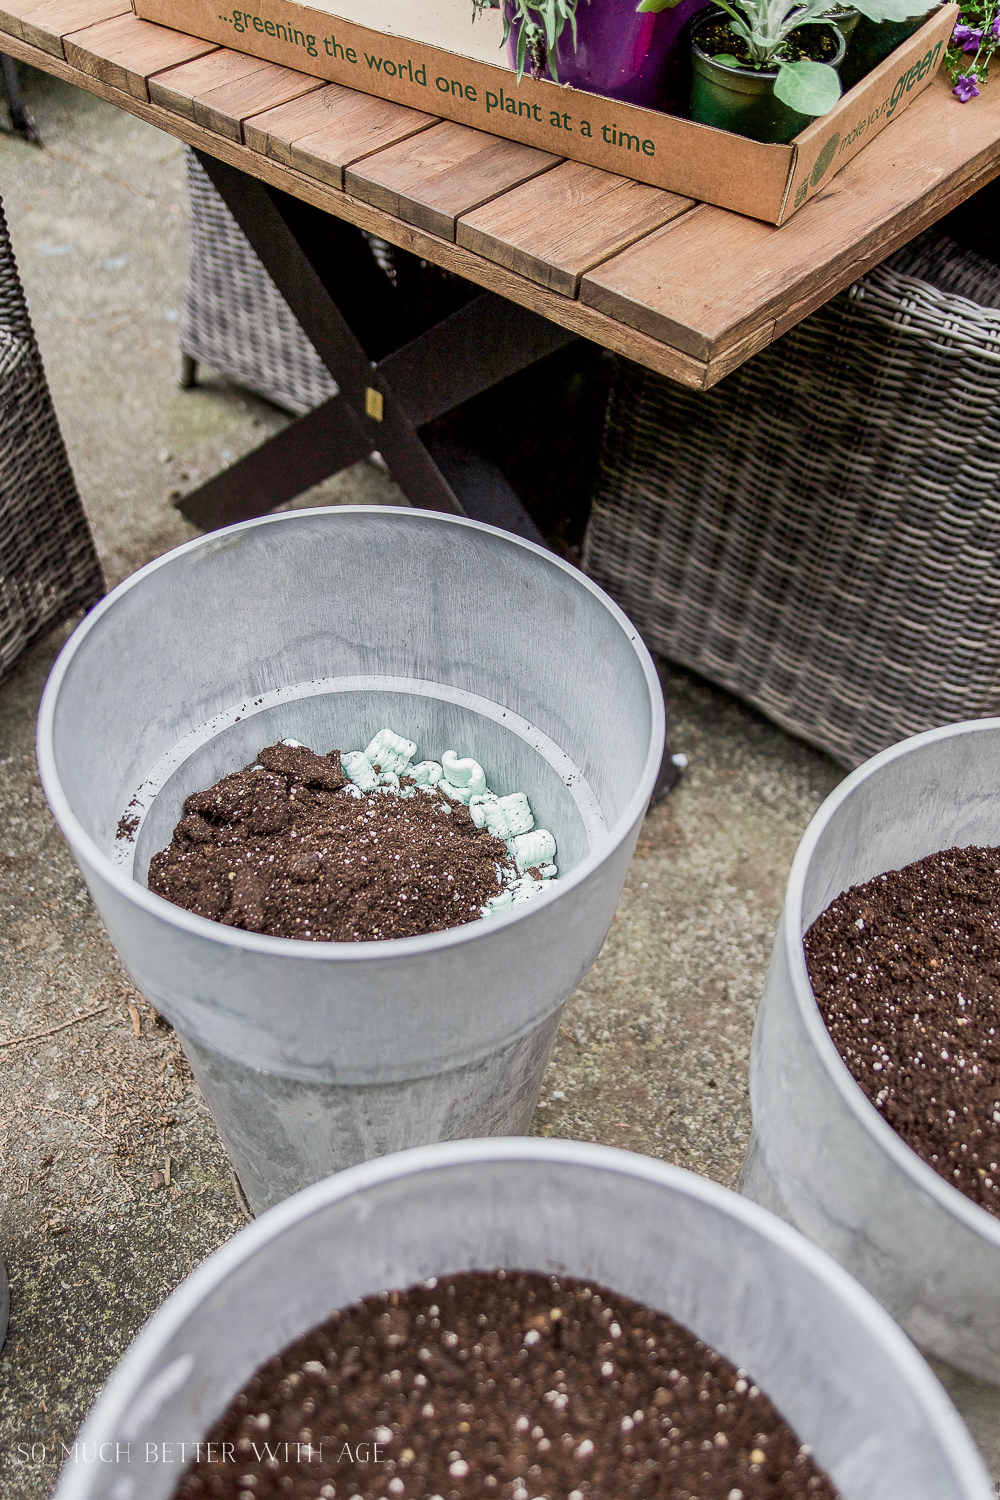 Soil on top of the styrofoam in the steel planters.